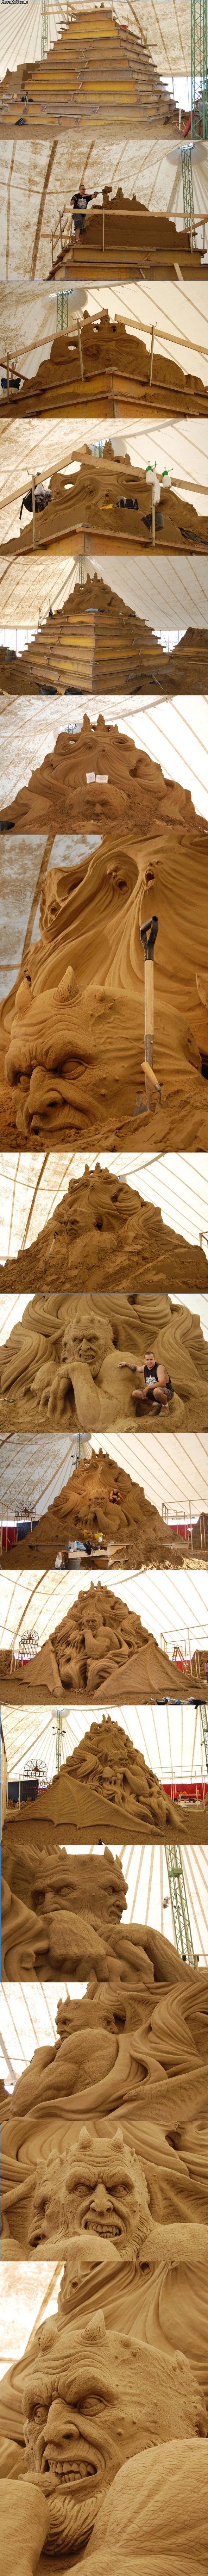 pimp sand castle. .. someone give this man a medal!